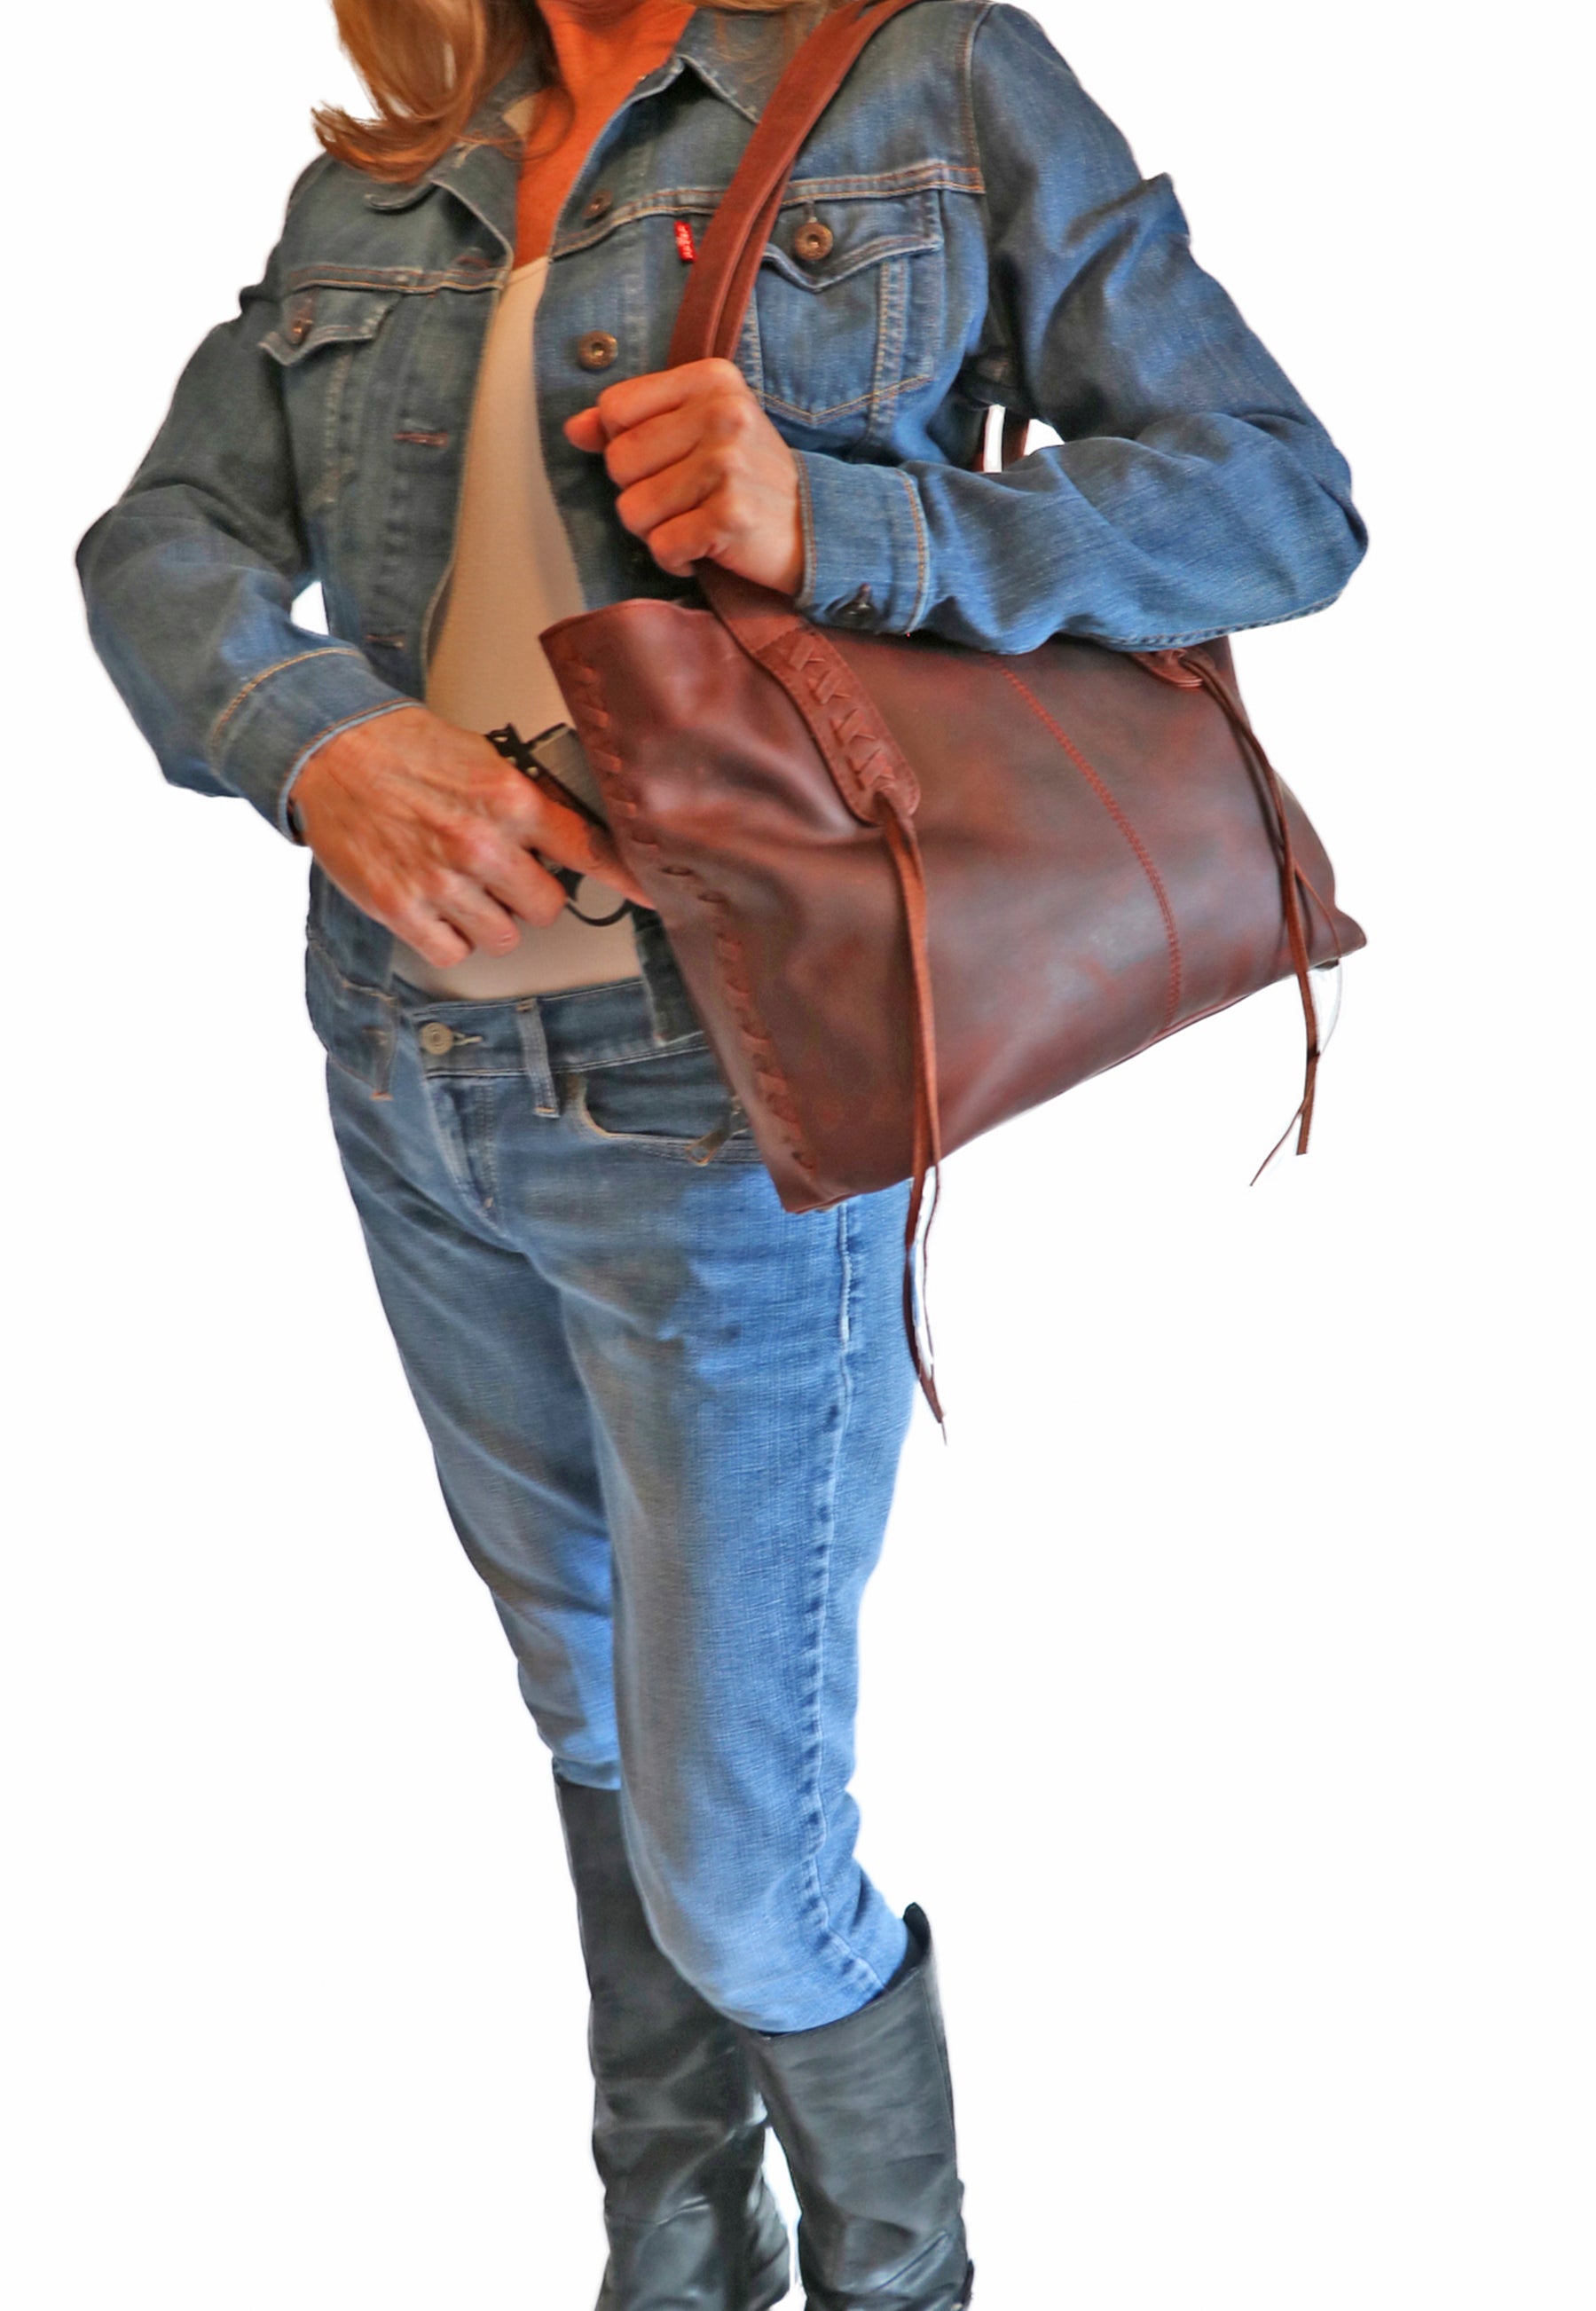 Model demonstrating leather conceal carry purse